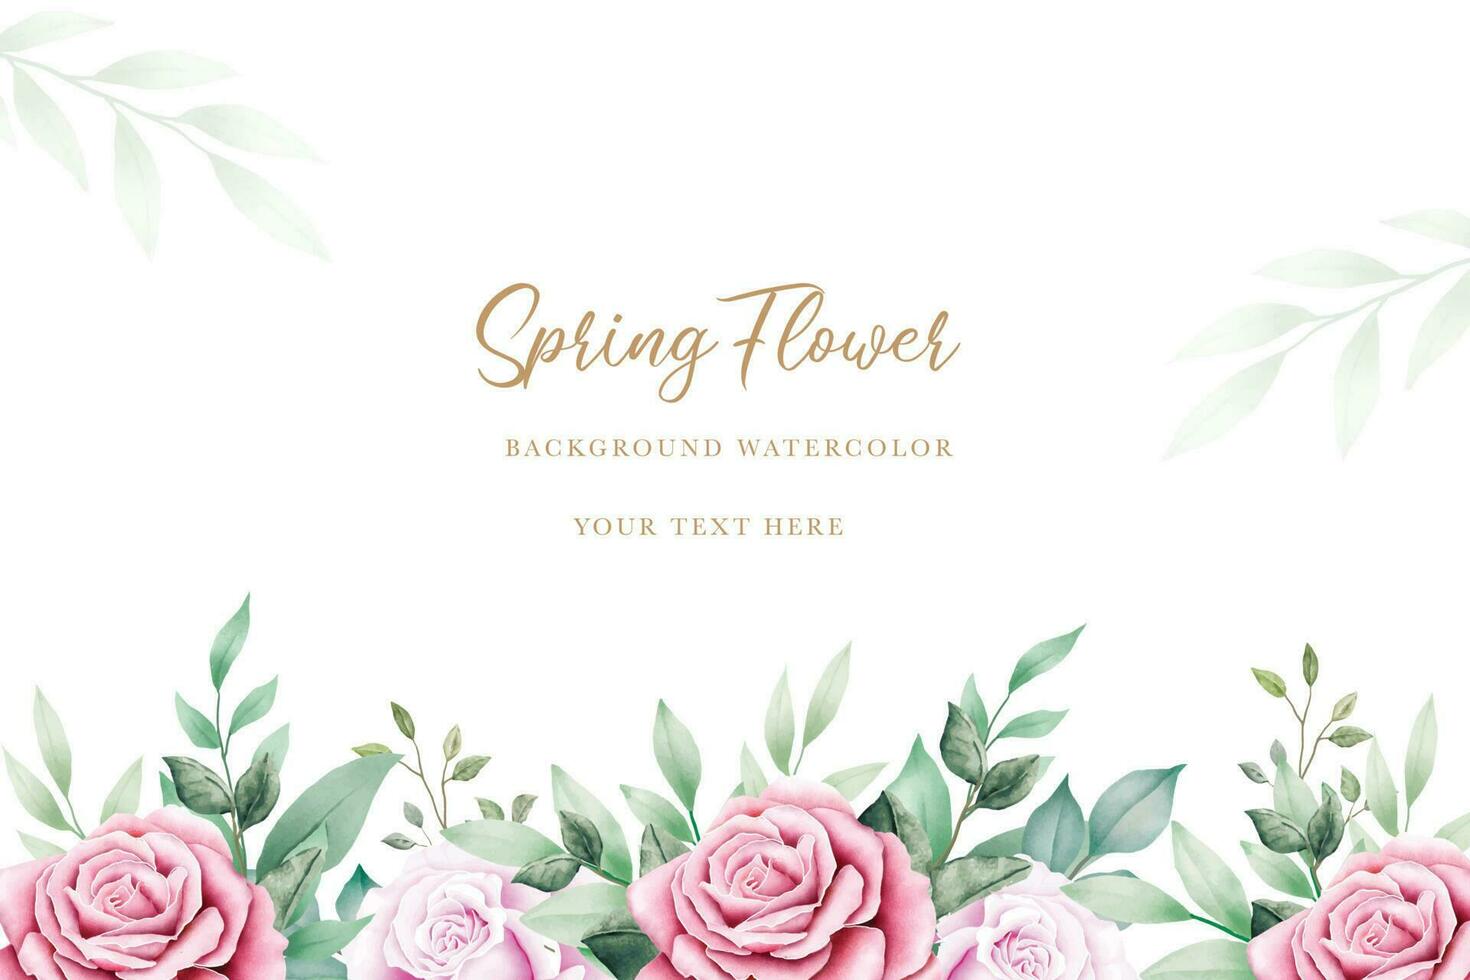 Beautiful Floral Spring Background Watercolor vector